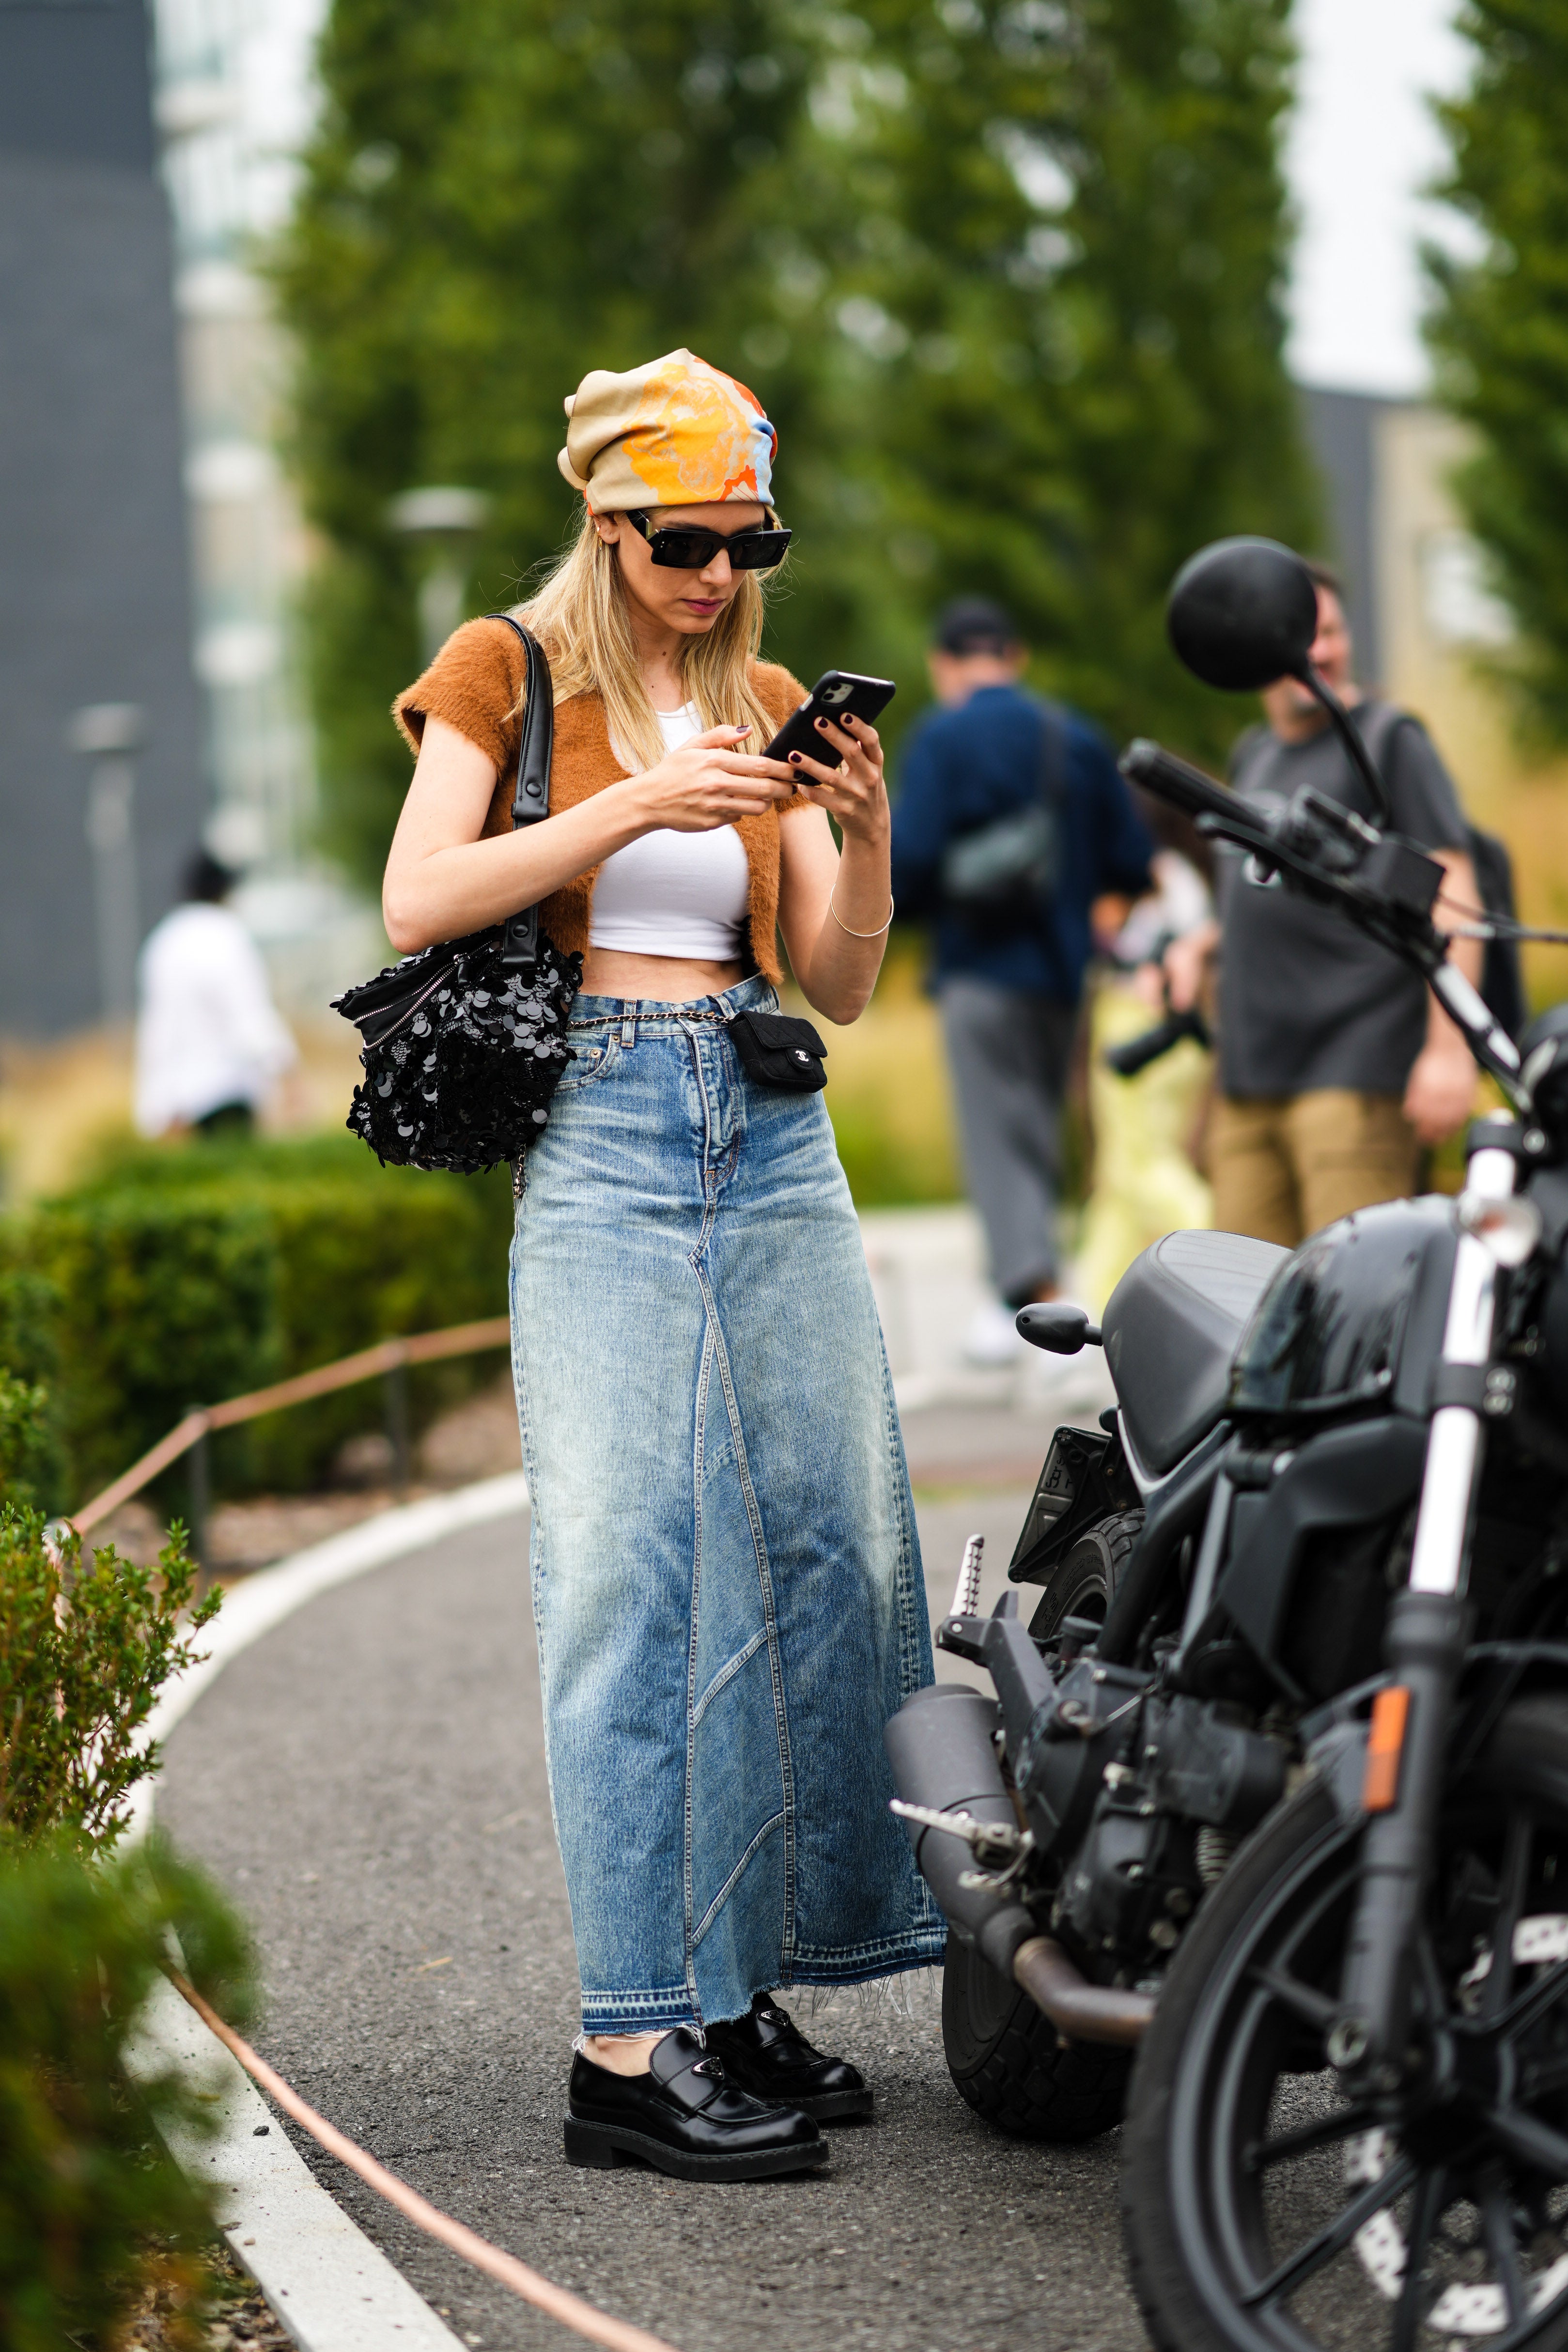 20 Best Outfit Ideas for How to Wear a Denim Skirt - Be So You